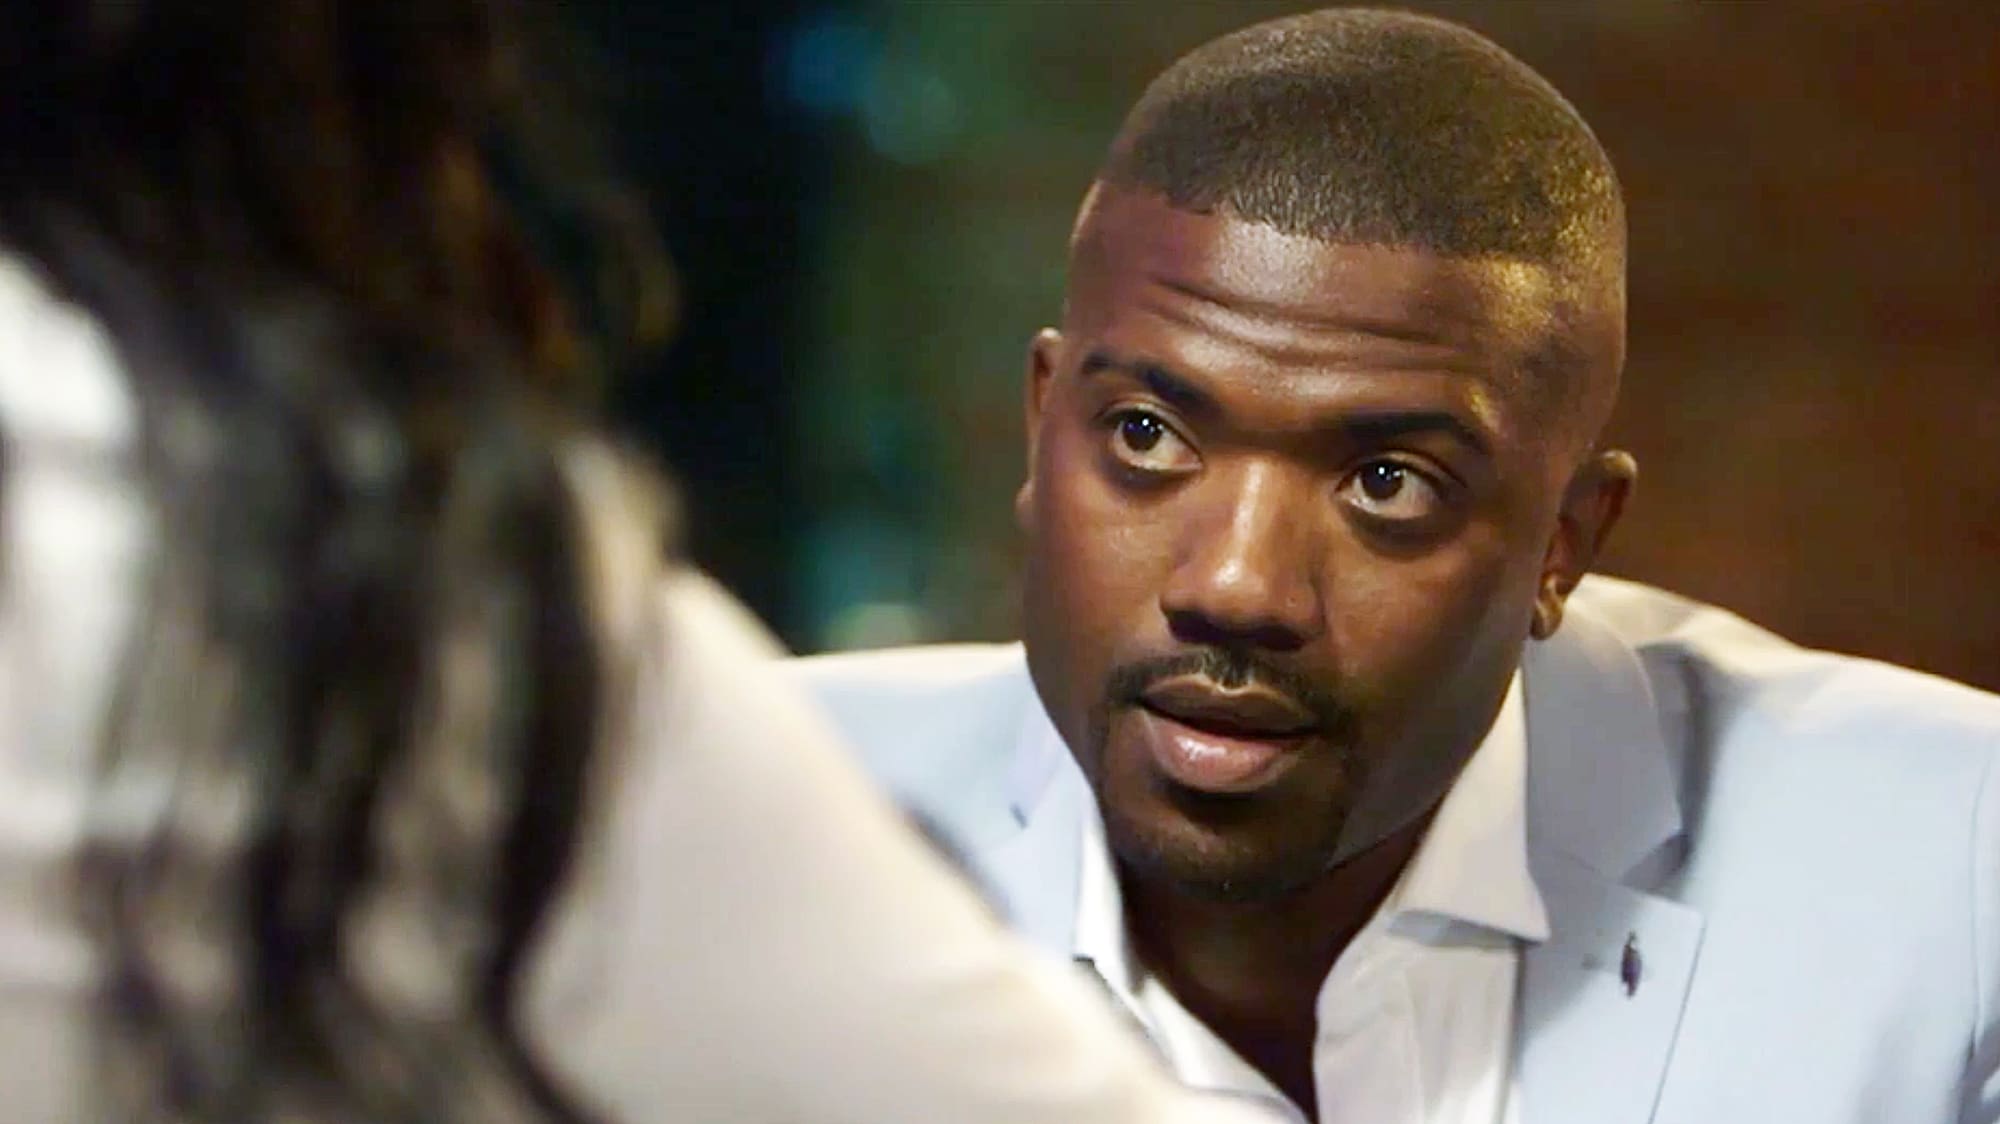 Ray J Invested $5 Million In Cannabis And CBD Management Company